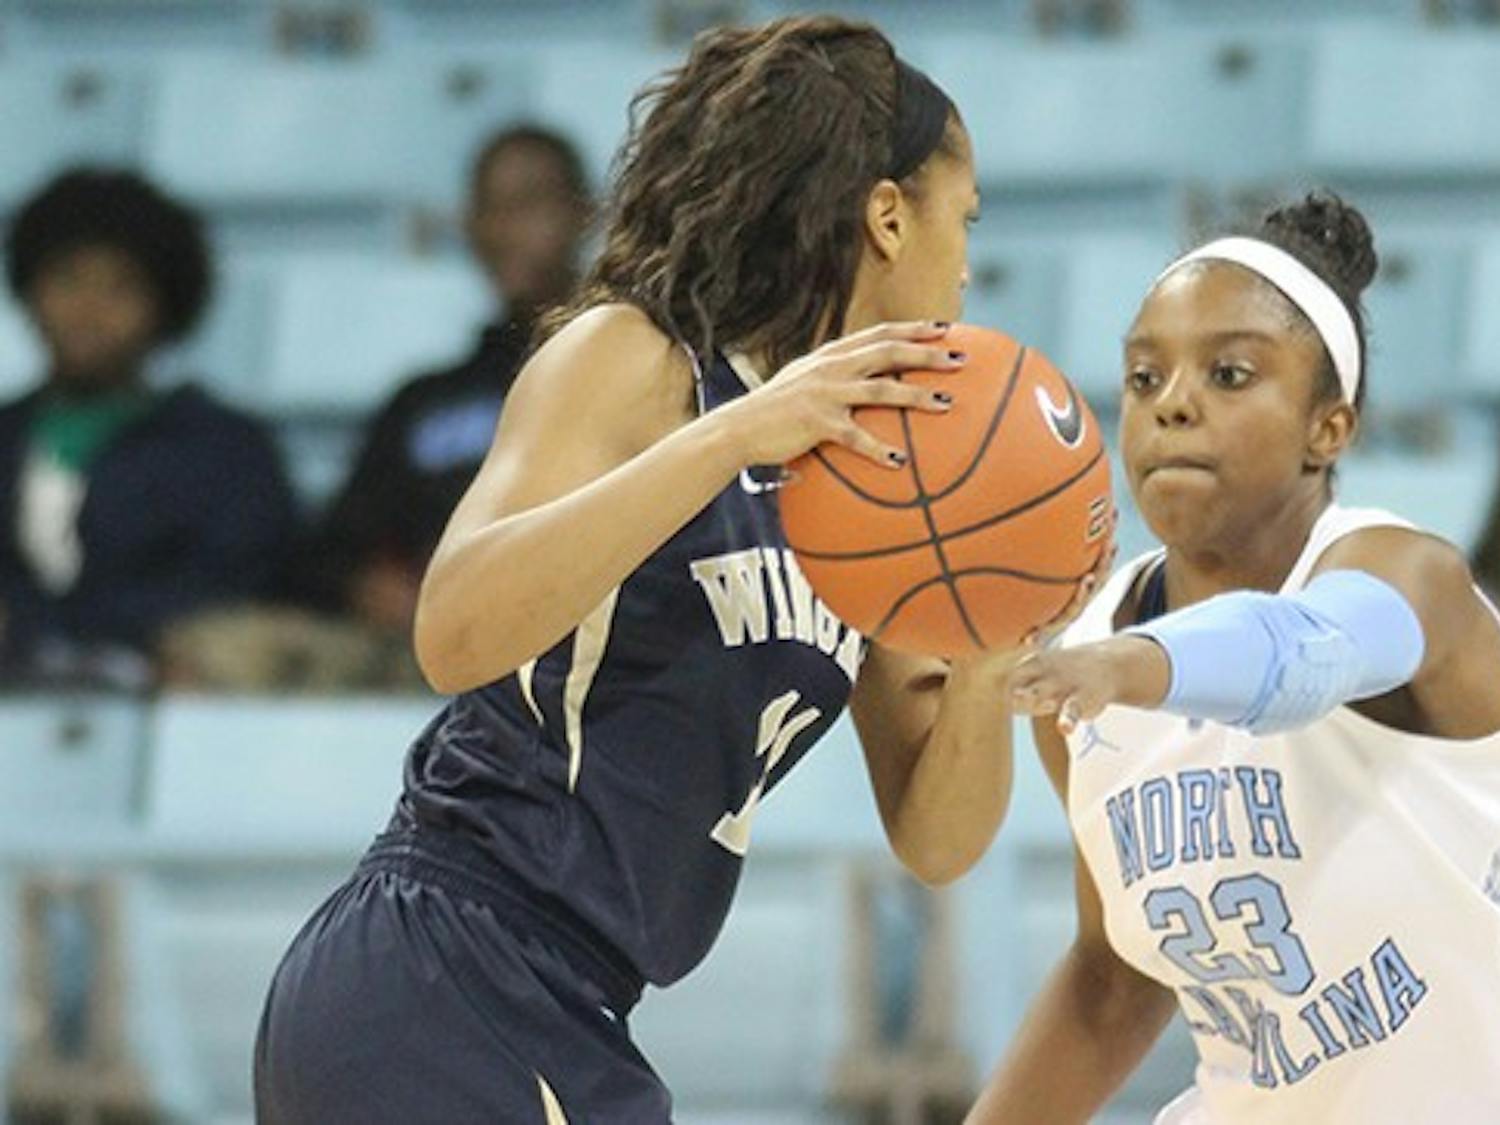 Women's Basketball Exhibtion Game vs. Wingate on Tuesday November 5th